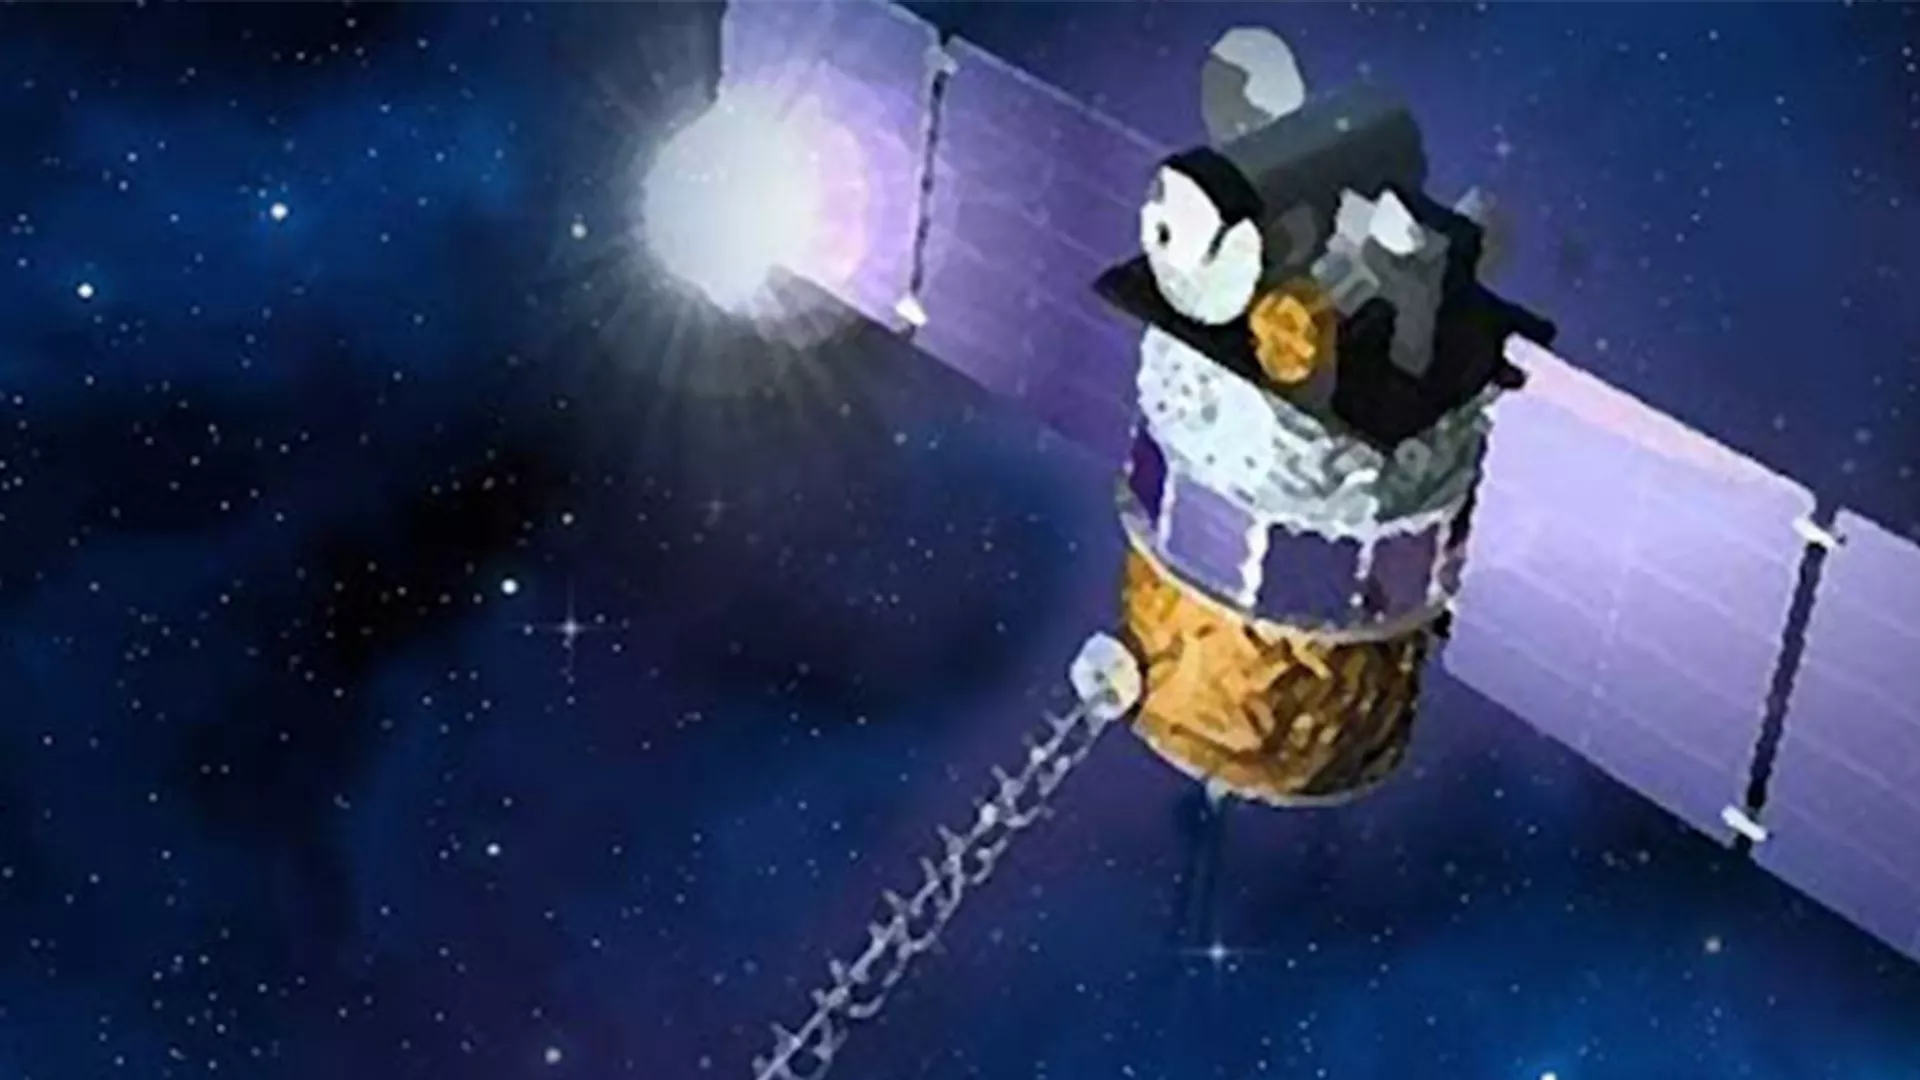 Image of the Discover Satellite in space